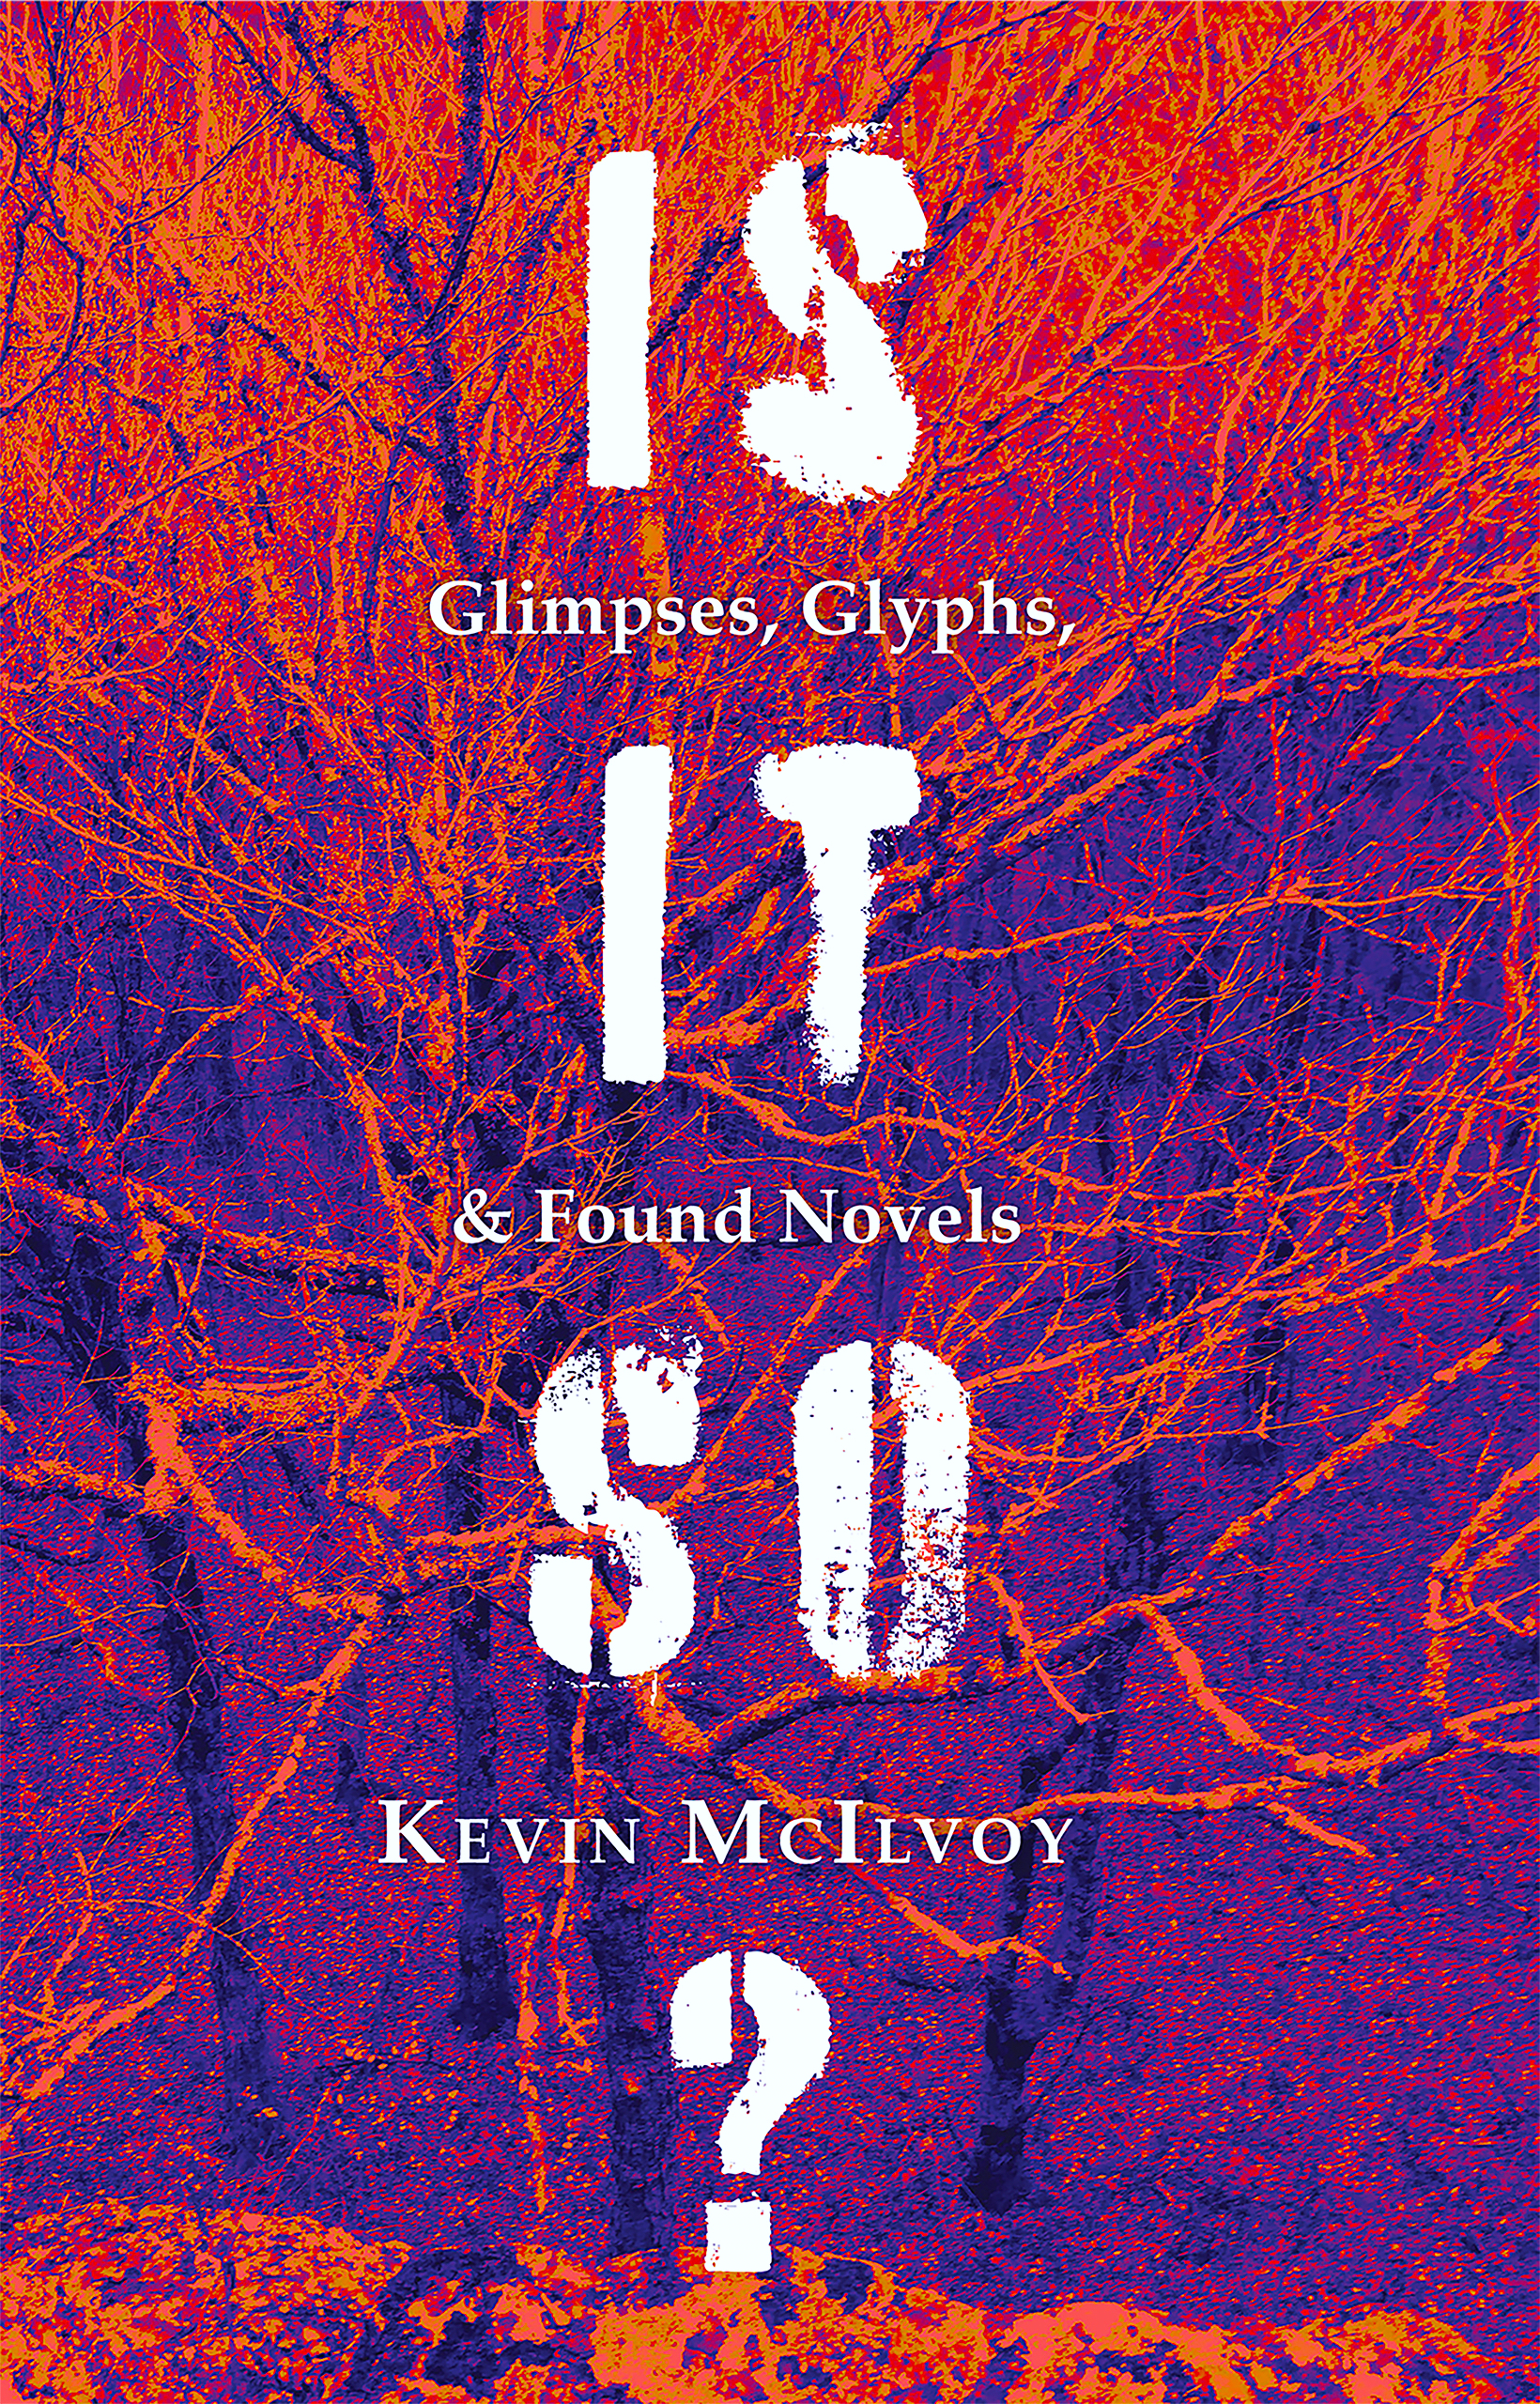 Image of the First Edition book cover for Mc McIlvoy's new (poshumously released) collection, "Is It So?"